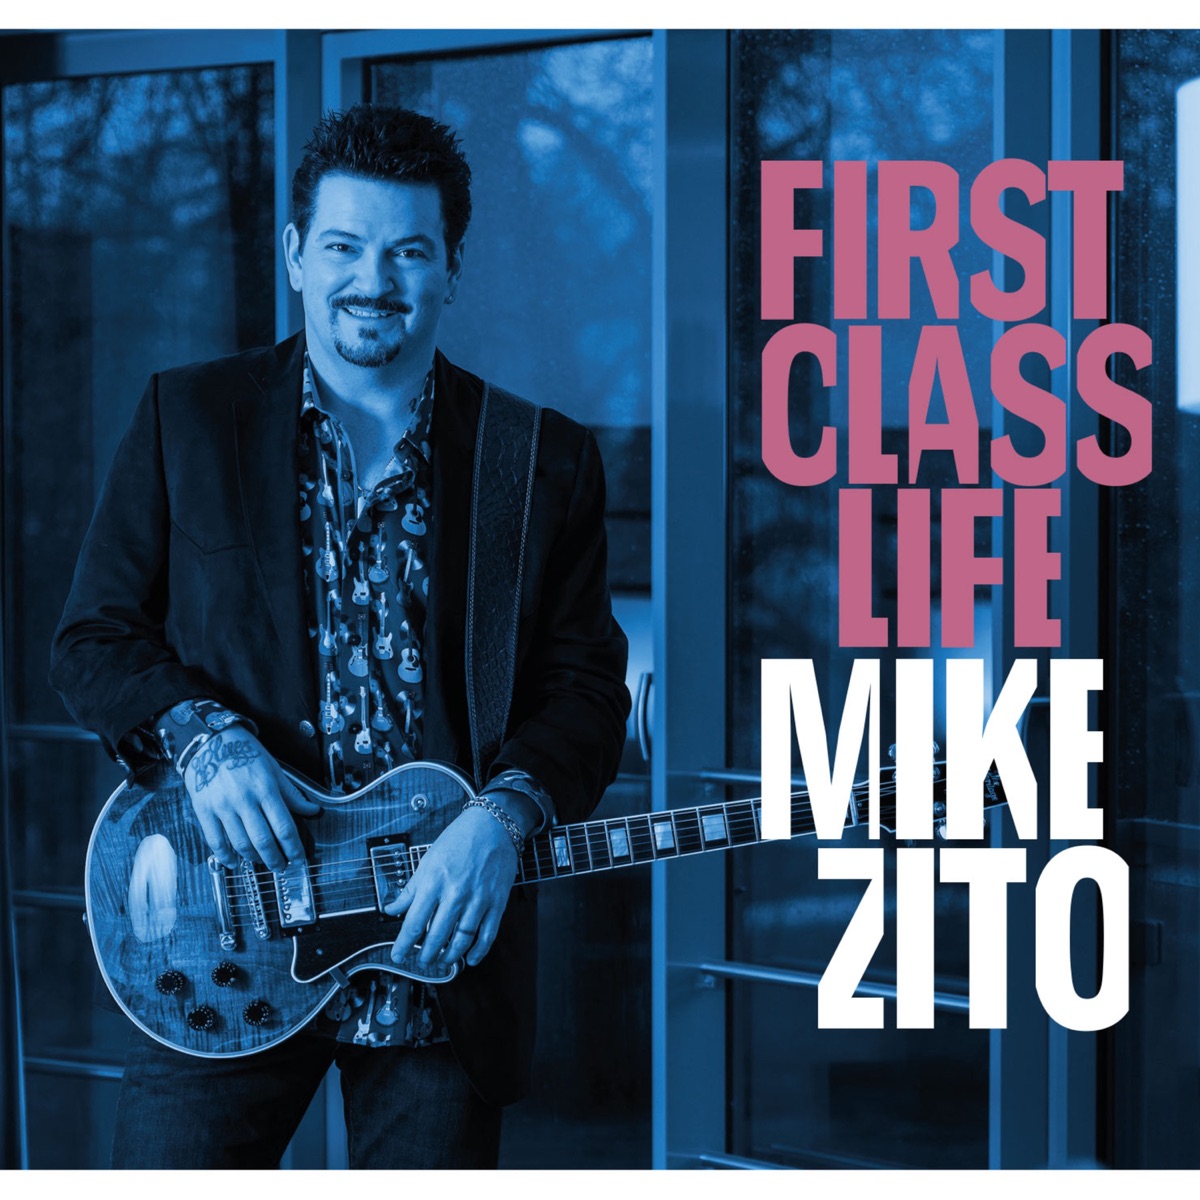 Live From The Top by Mike Zito on Apple Music